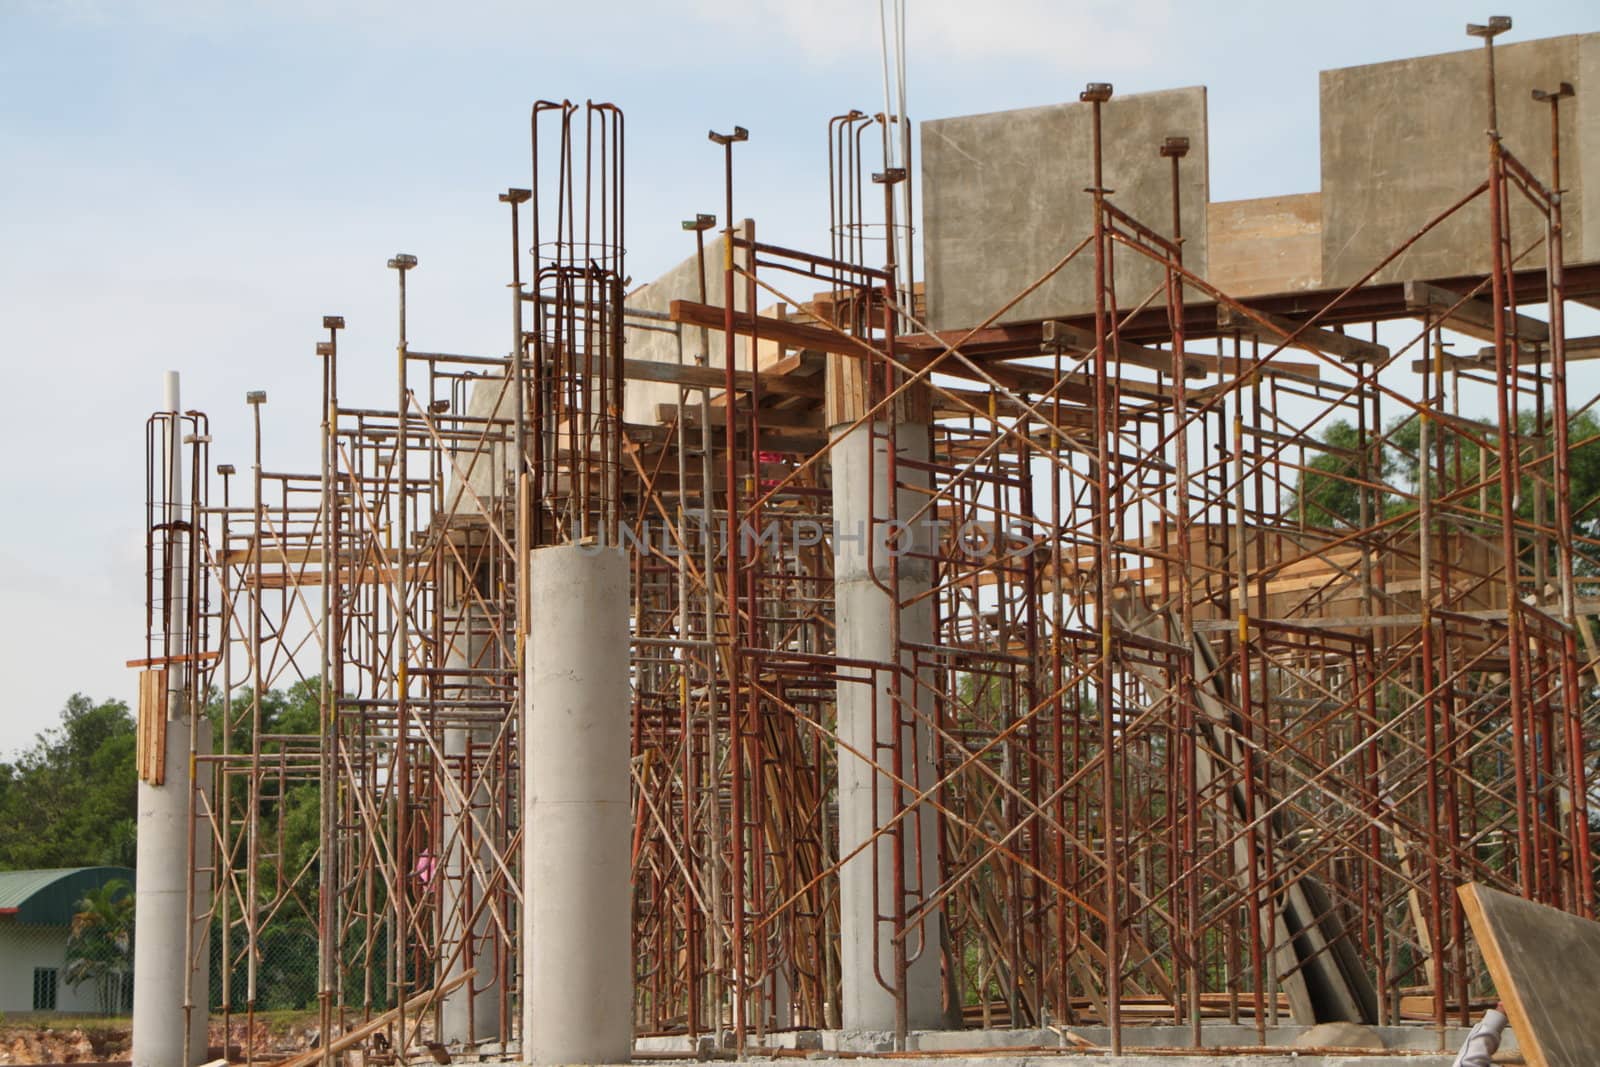 Erection of formwork and steel reinforcement for building in progress